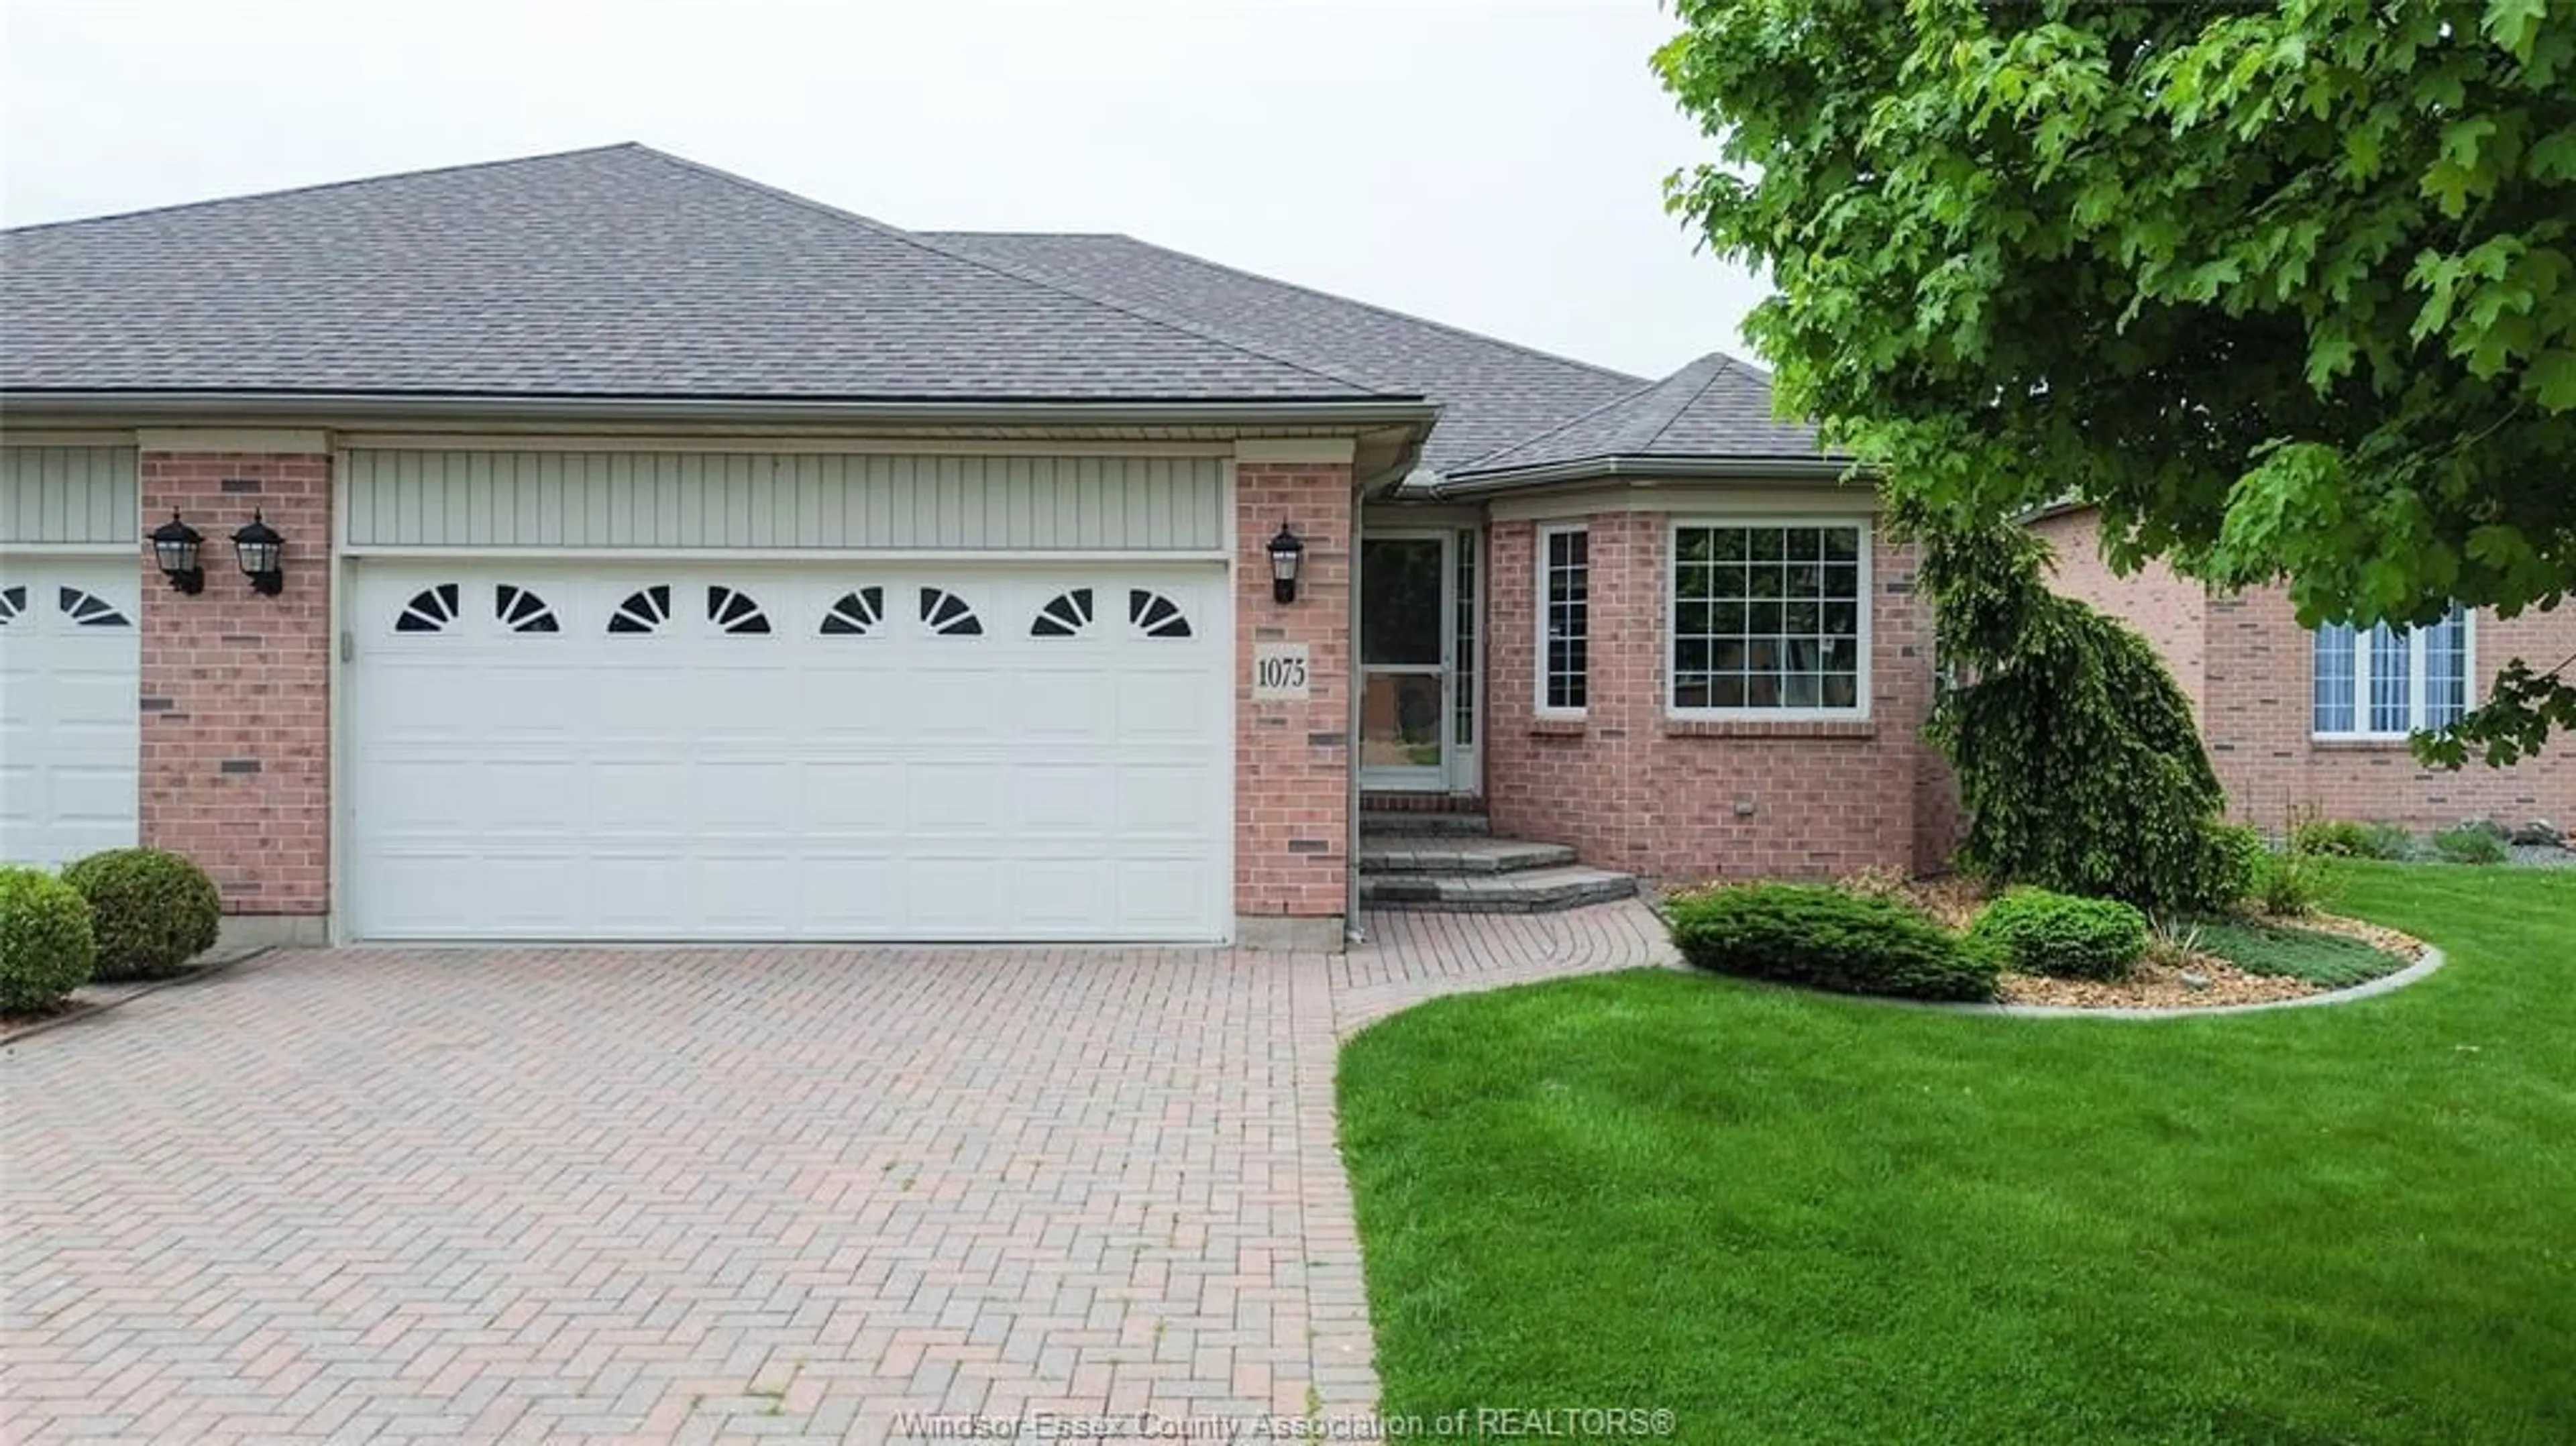 Home with brick exterior material for 1075 RENDEZVOUS, Windsor Ontario N8P 1K5